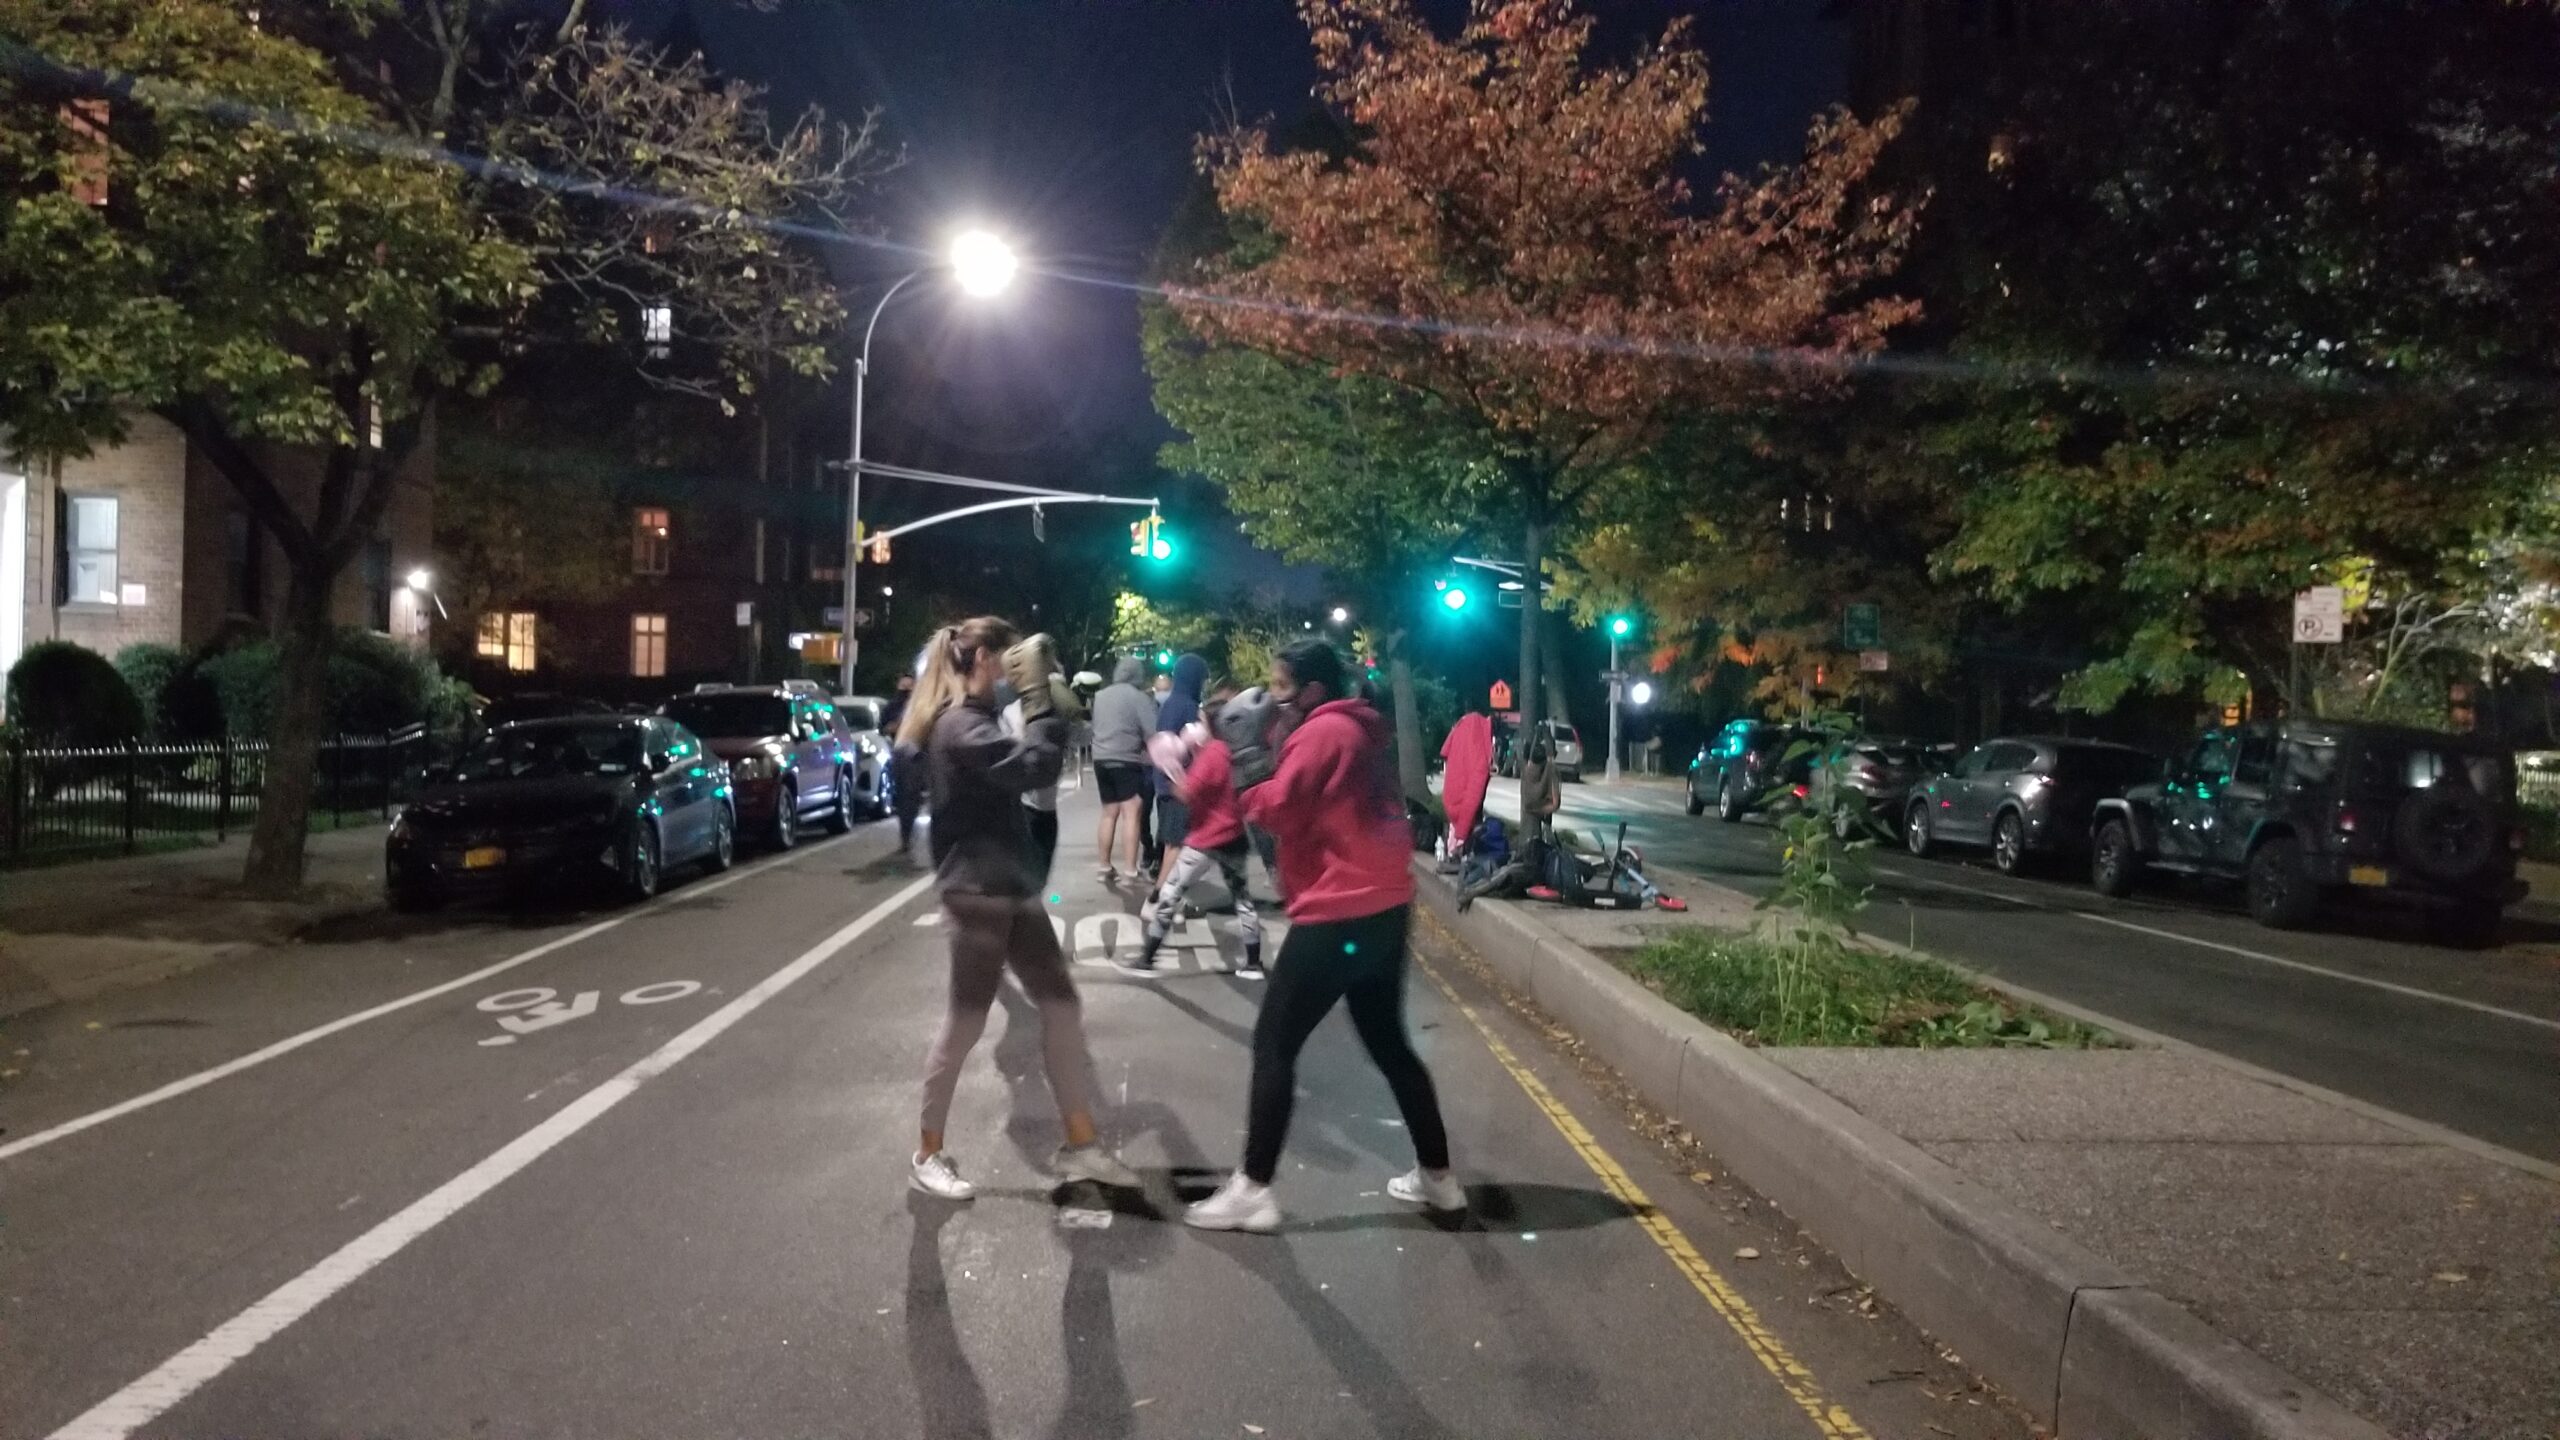 On a darkened 34th Avenue lit by streetlamps, students wearing boxing gloves are practicing kickboxing routines in the middle of the street. There are trees with autumn leaves on the median behind them.